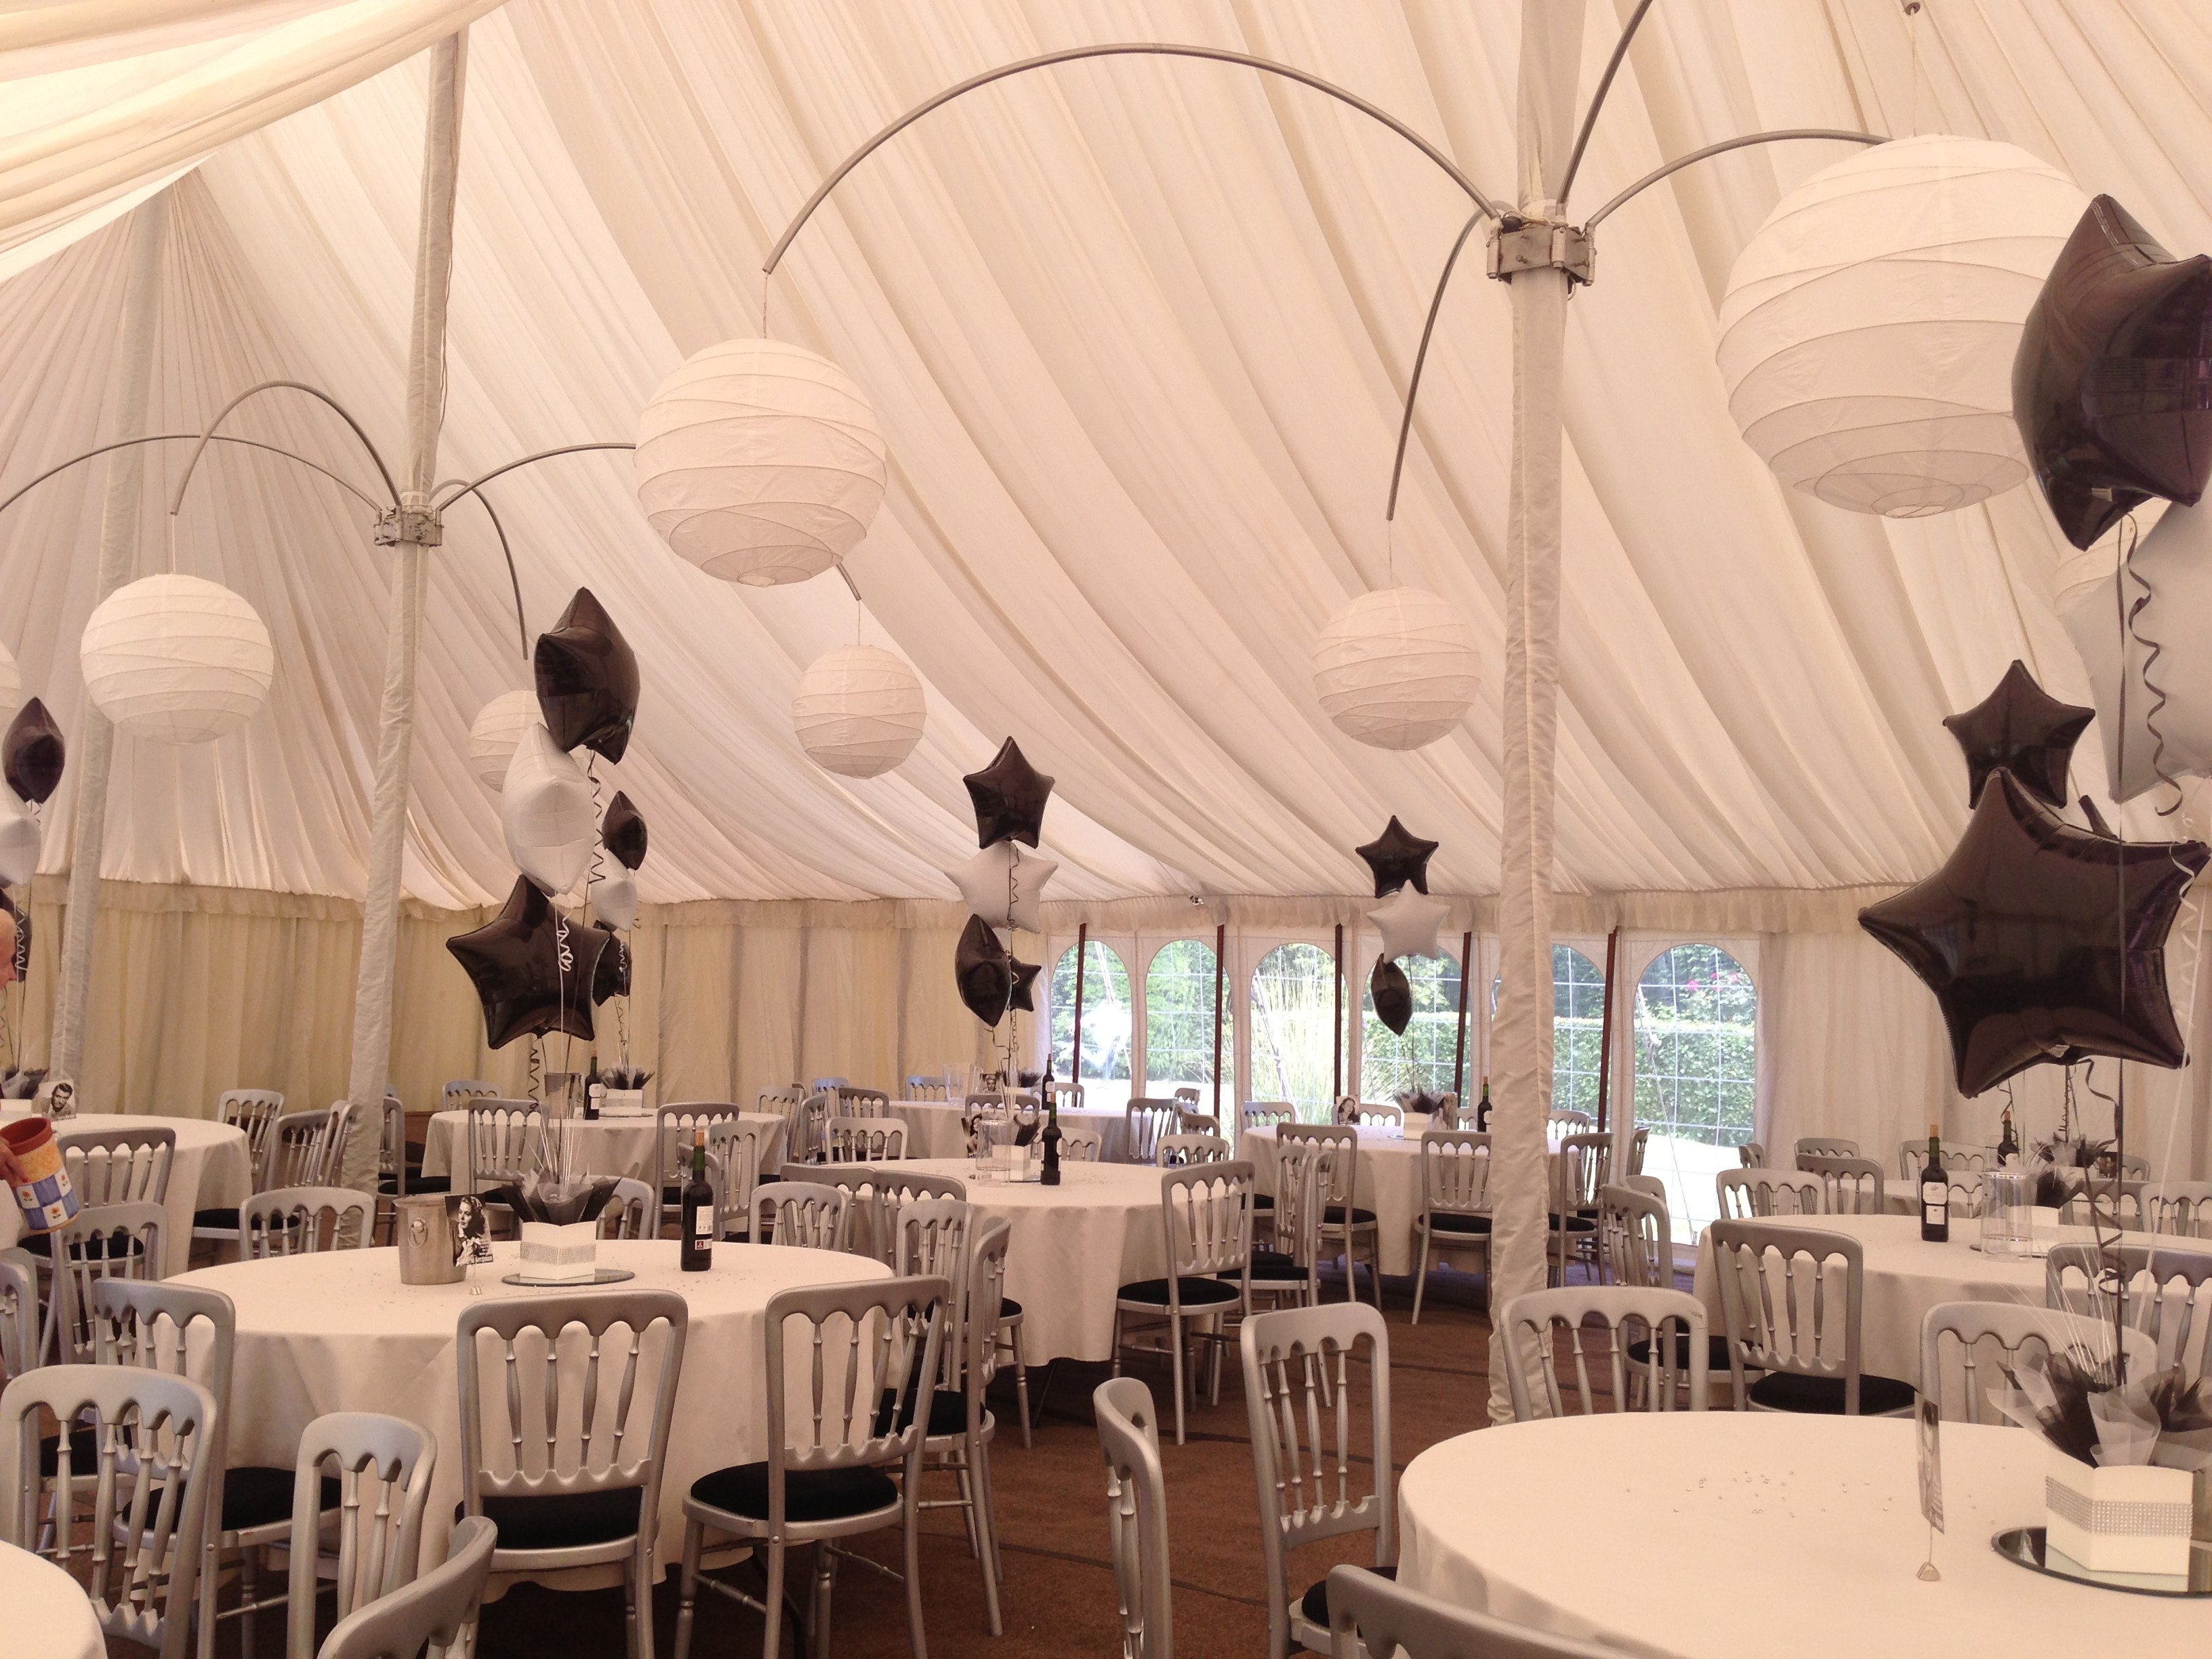 Party balloons in a marquee